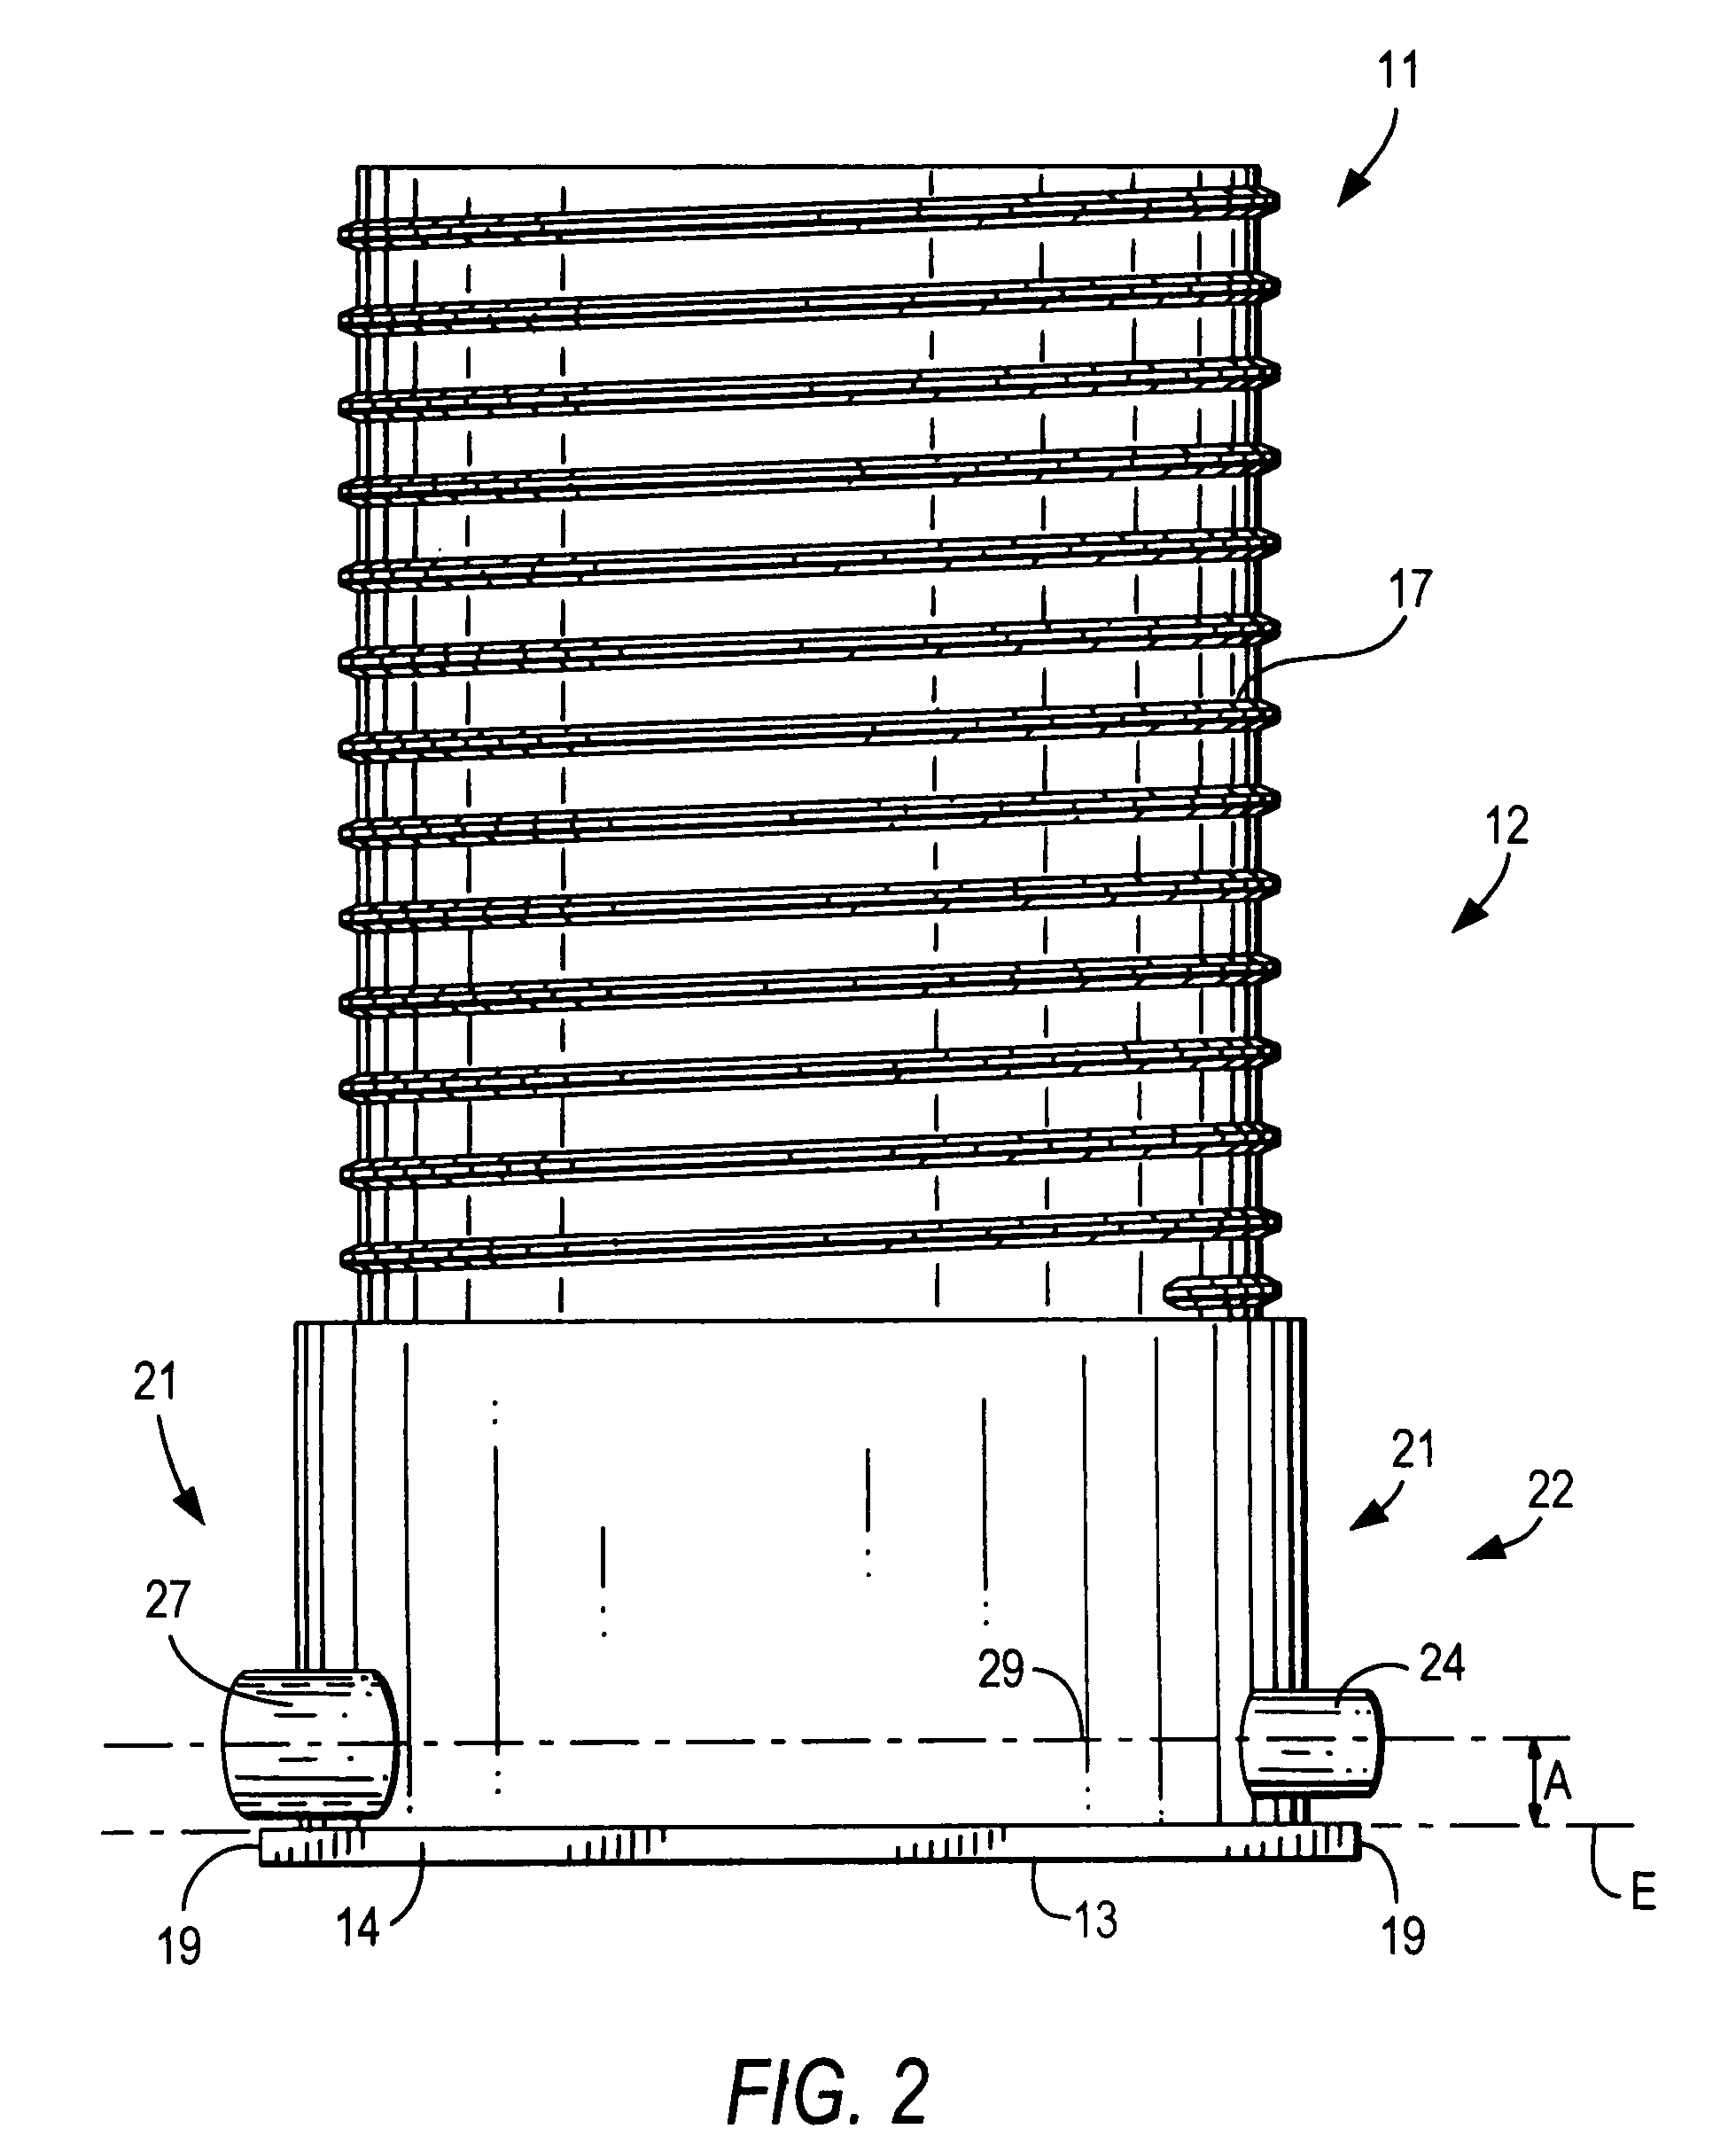 Embeddable device for passing conduits through a constructional component